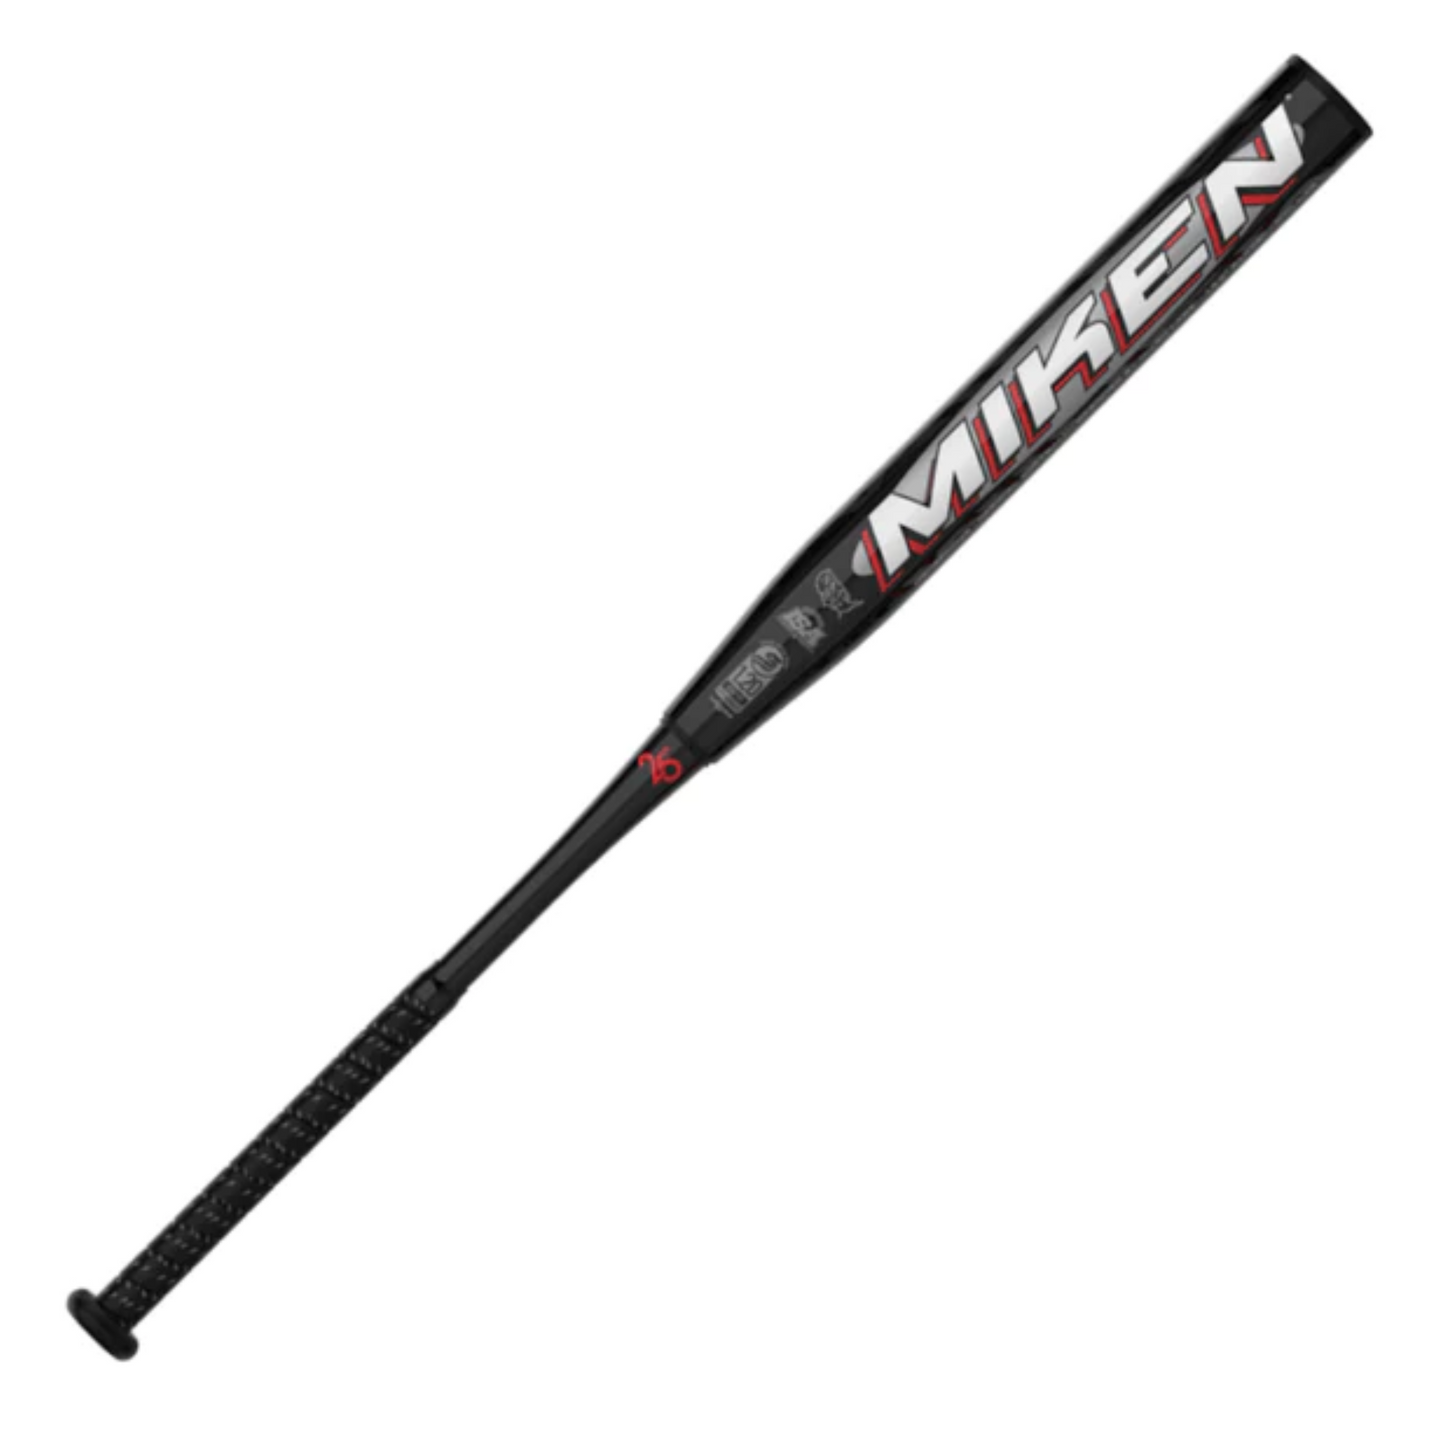 A photo of the Miken Freak OG 13.5" Barrel 25th Anniversary 2pc Balanced USSSA Slo-Pitch Bat back view.